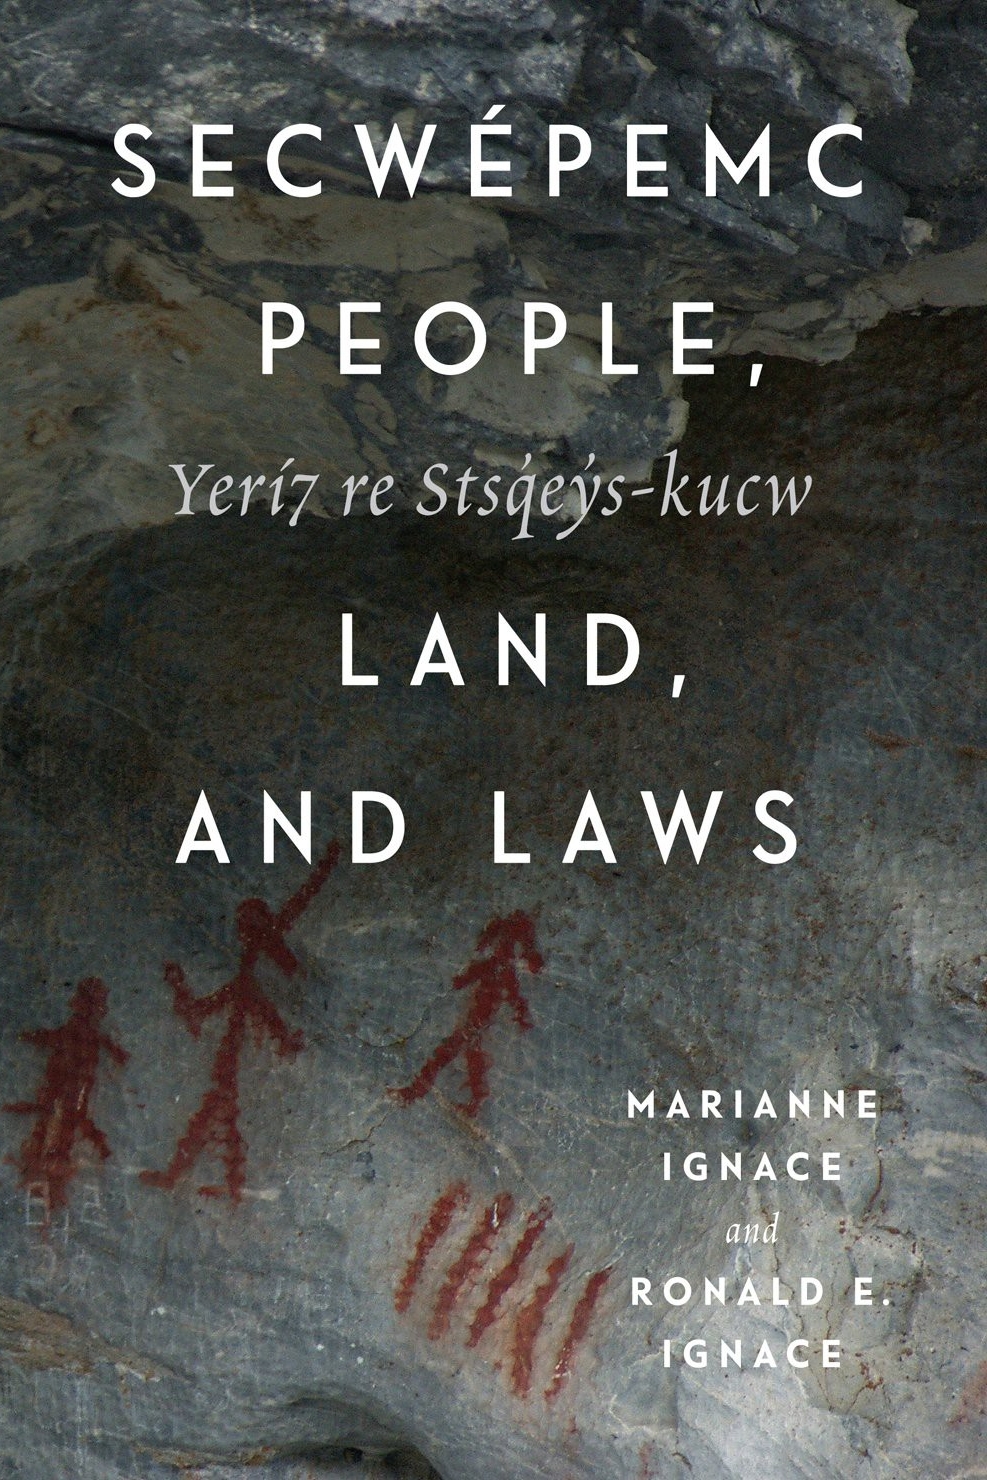 Secwépemc People, Land, and Laws Yerí7 re Stsq'ey's-kucw By Marianne Ignace and Ronald E Ignace